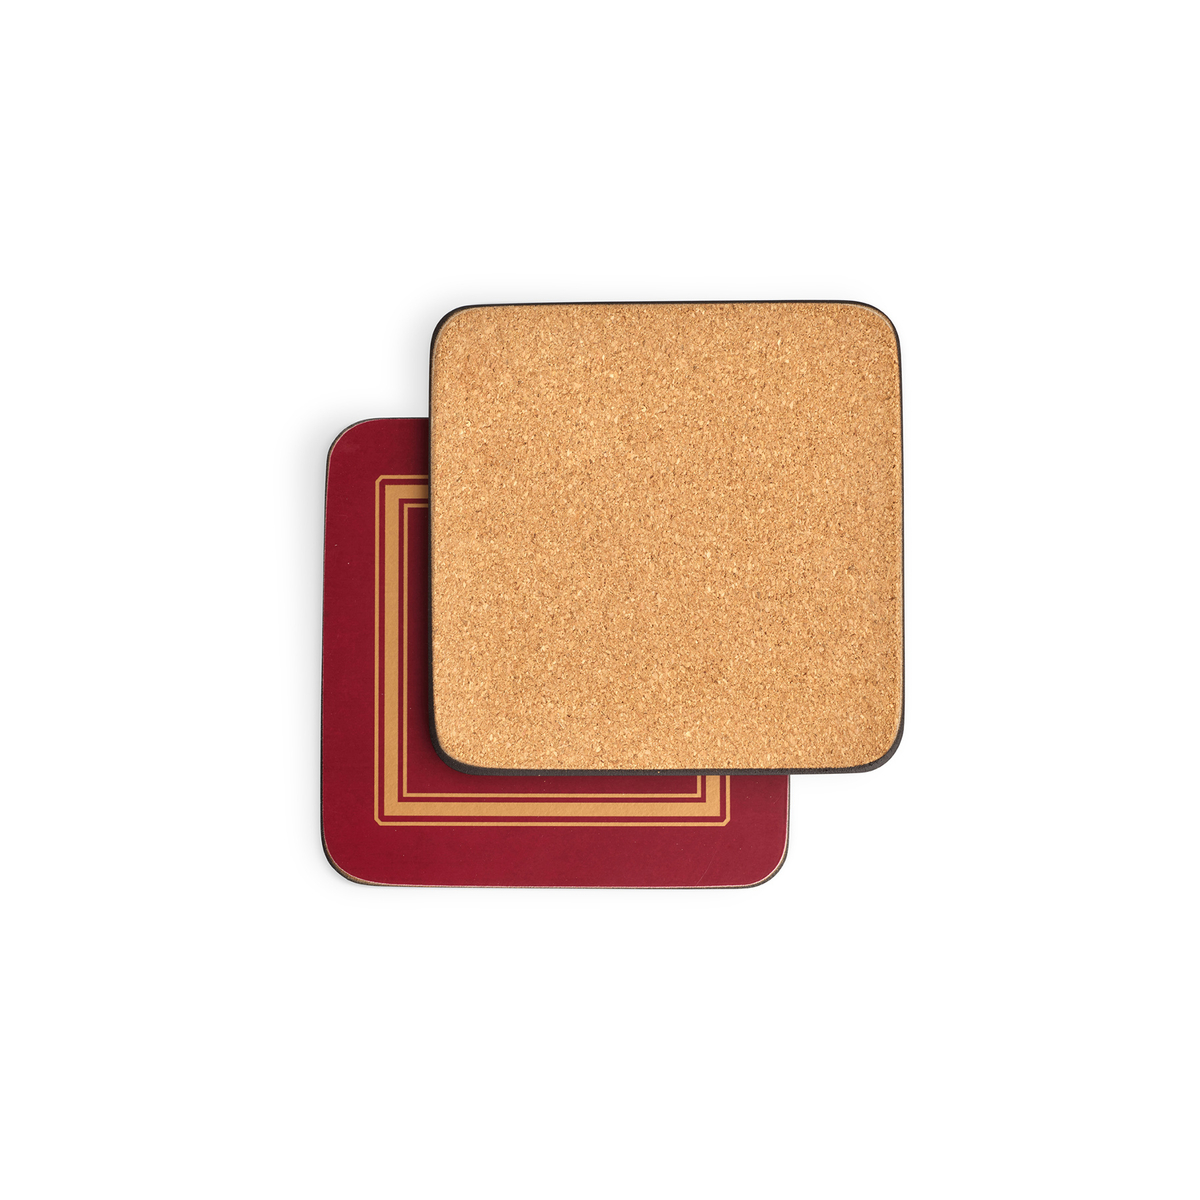 Classic Burgundy Set of 6 Coasters image number null